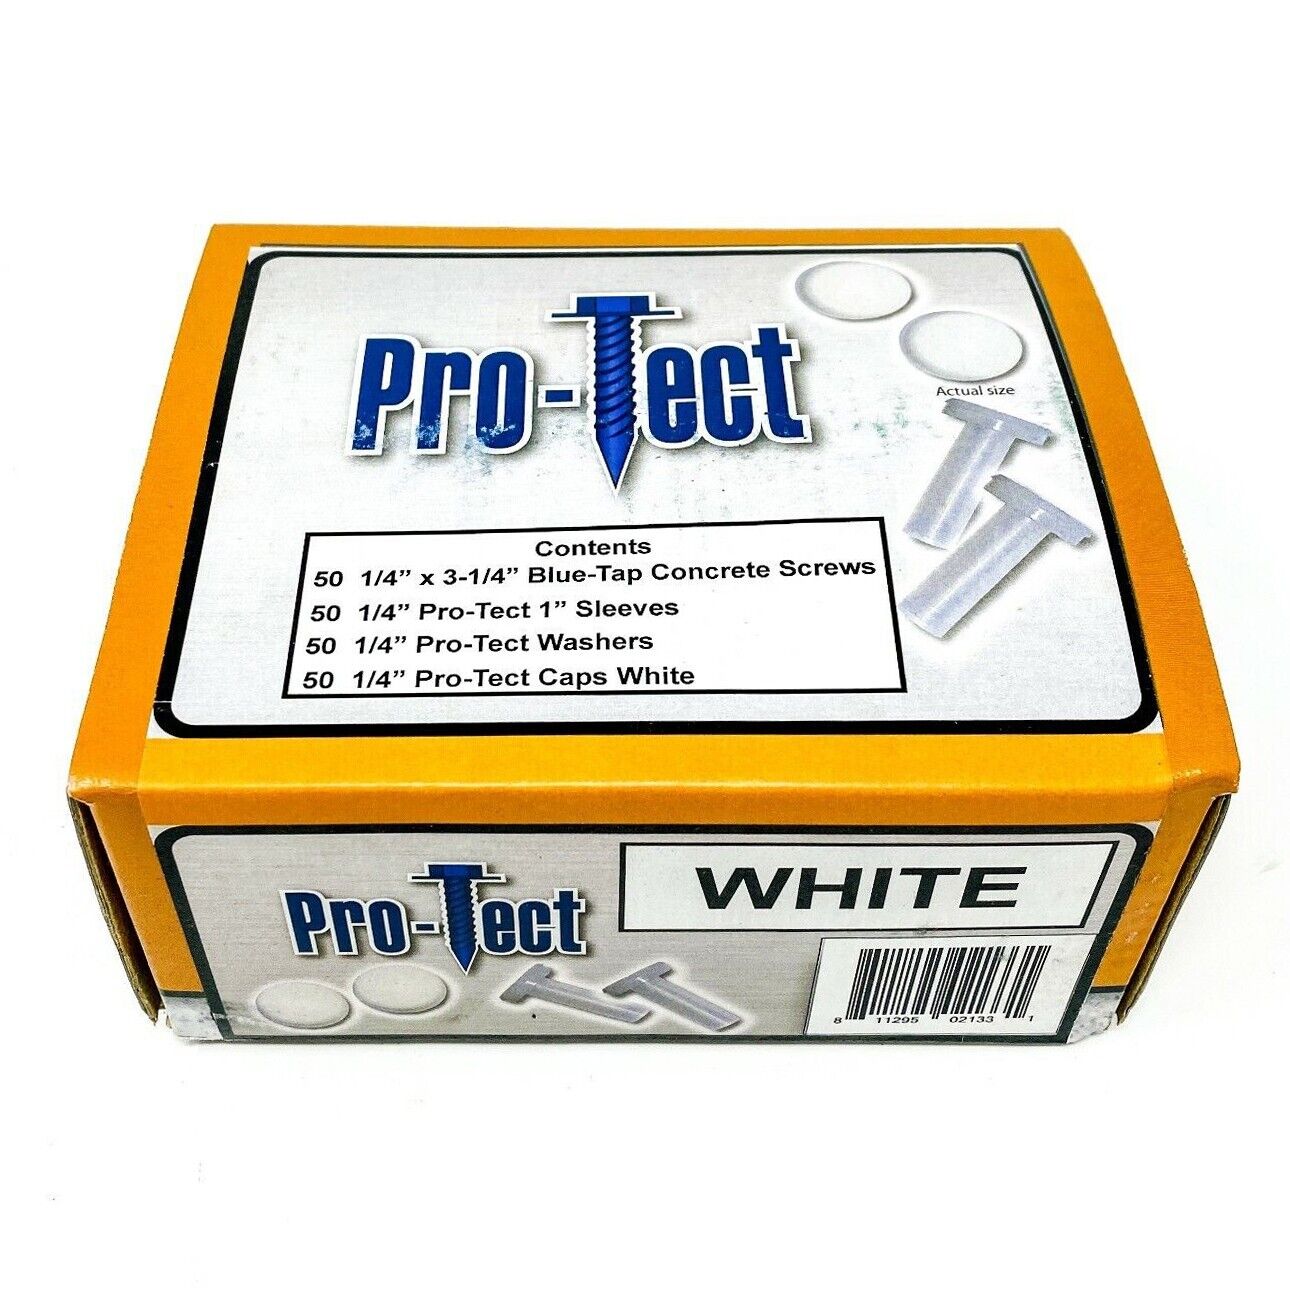 200 pcs Set Pro-Tect WHITE Blue-Tap Concrete Screws, Sleeves, Washers and Caps PRO-TECT Does Not Apply